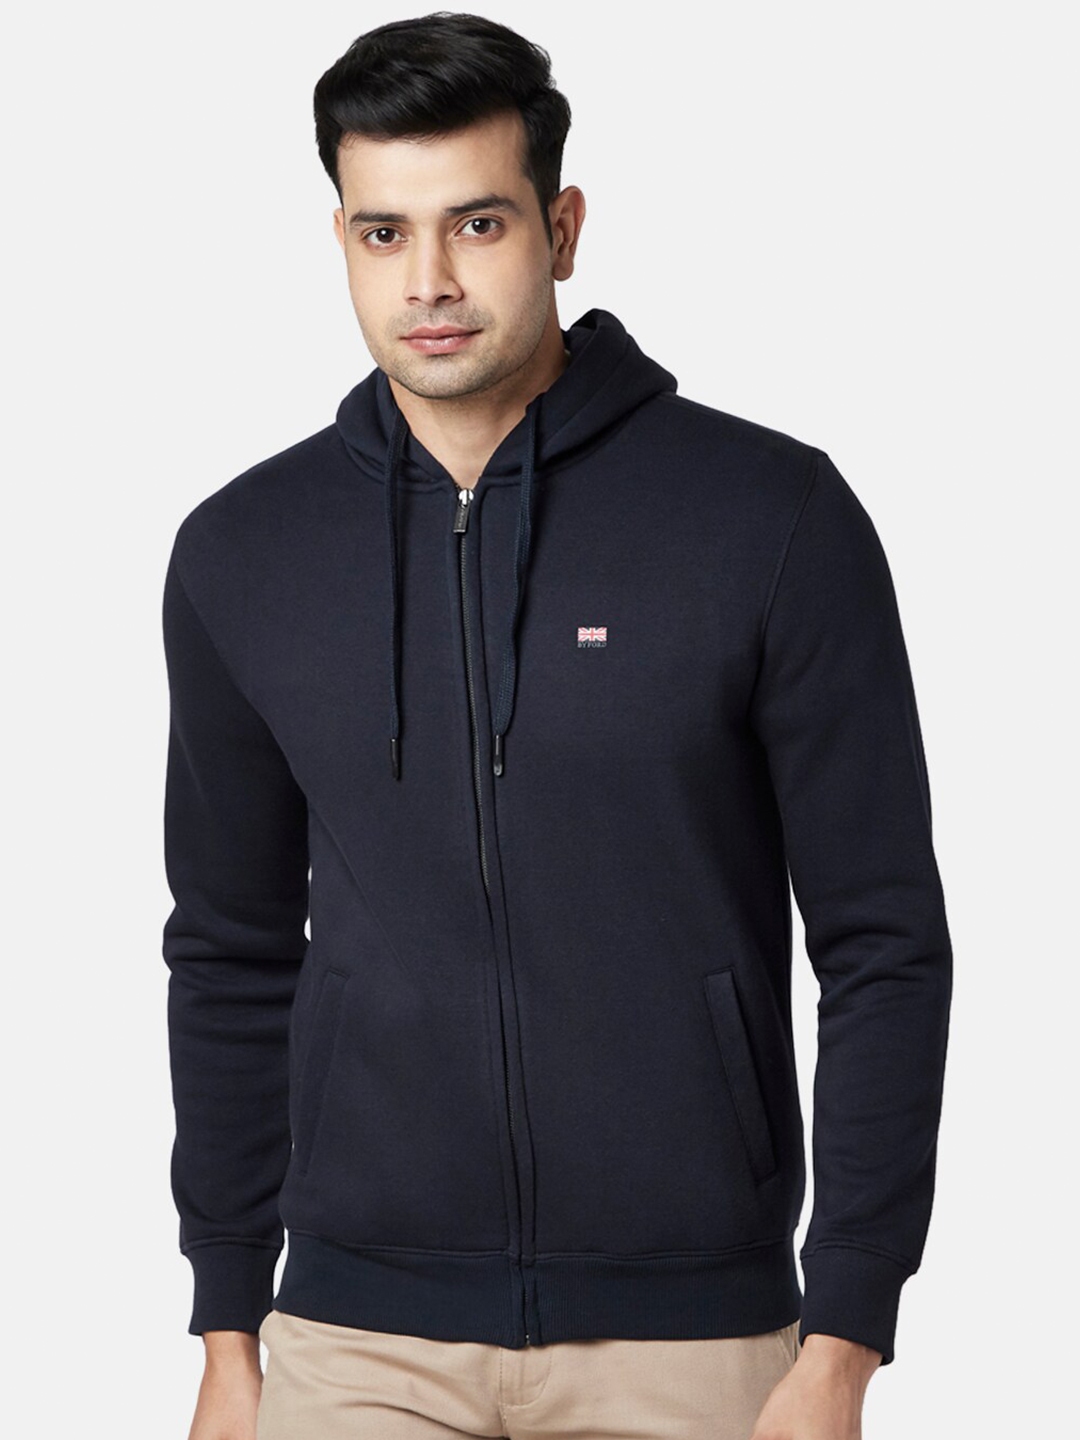 Buy BYFORD By Pantaloons Men Navy Blue Solid Front Open Hooded ...